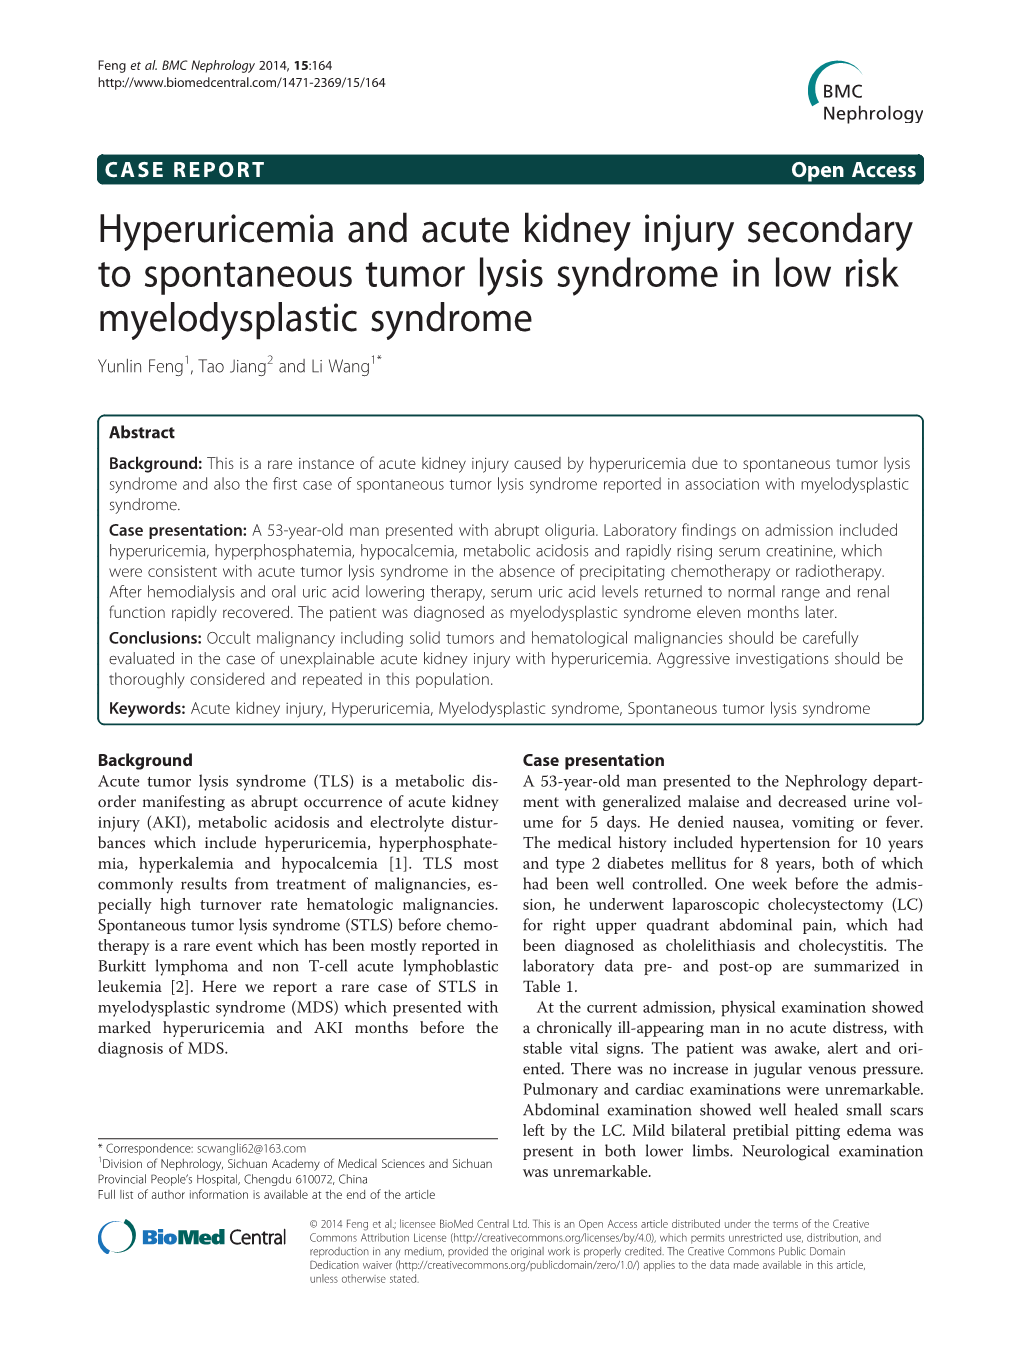 Hyperuricemia and Acute Kidney Injury Secondary to Spontaneous Tumor Lysis Syndrome in Low Risk Myelodysplastic Syndrome Yunlin Feng1, Tao Jiang2 and Li Wang1*